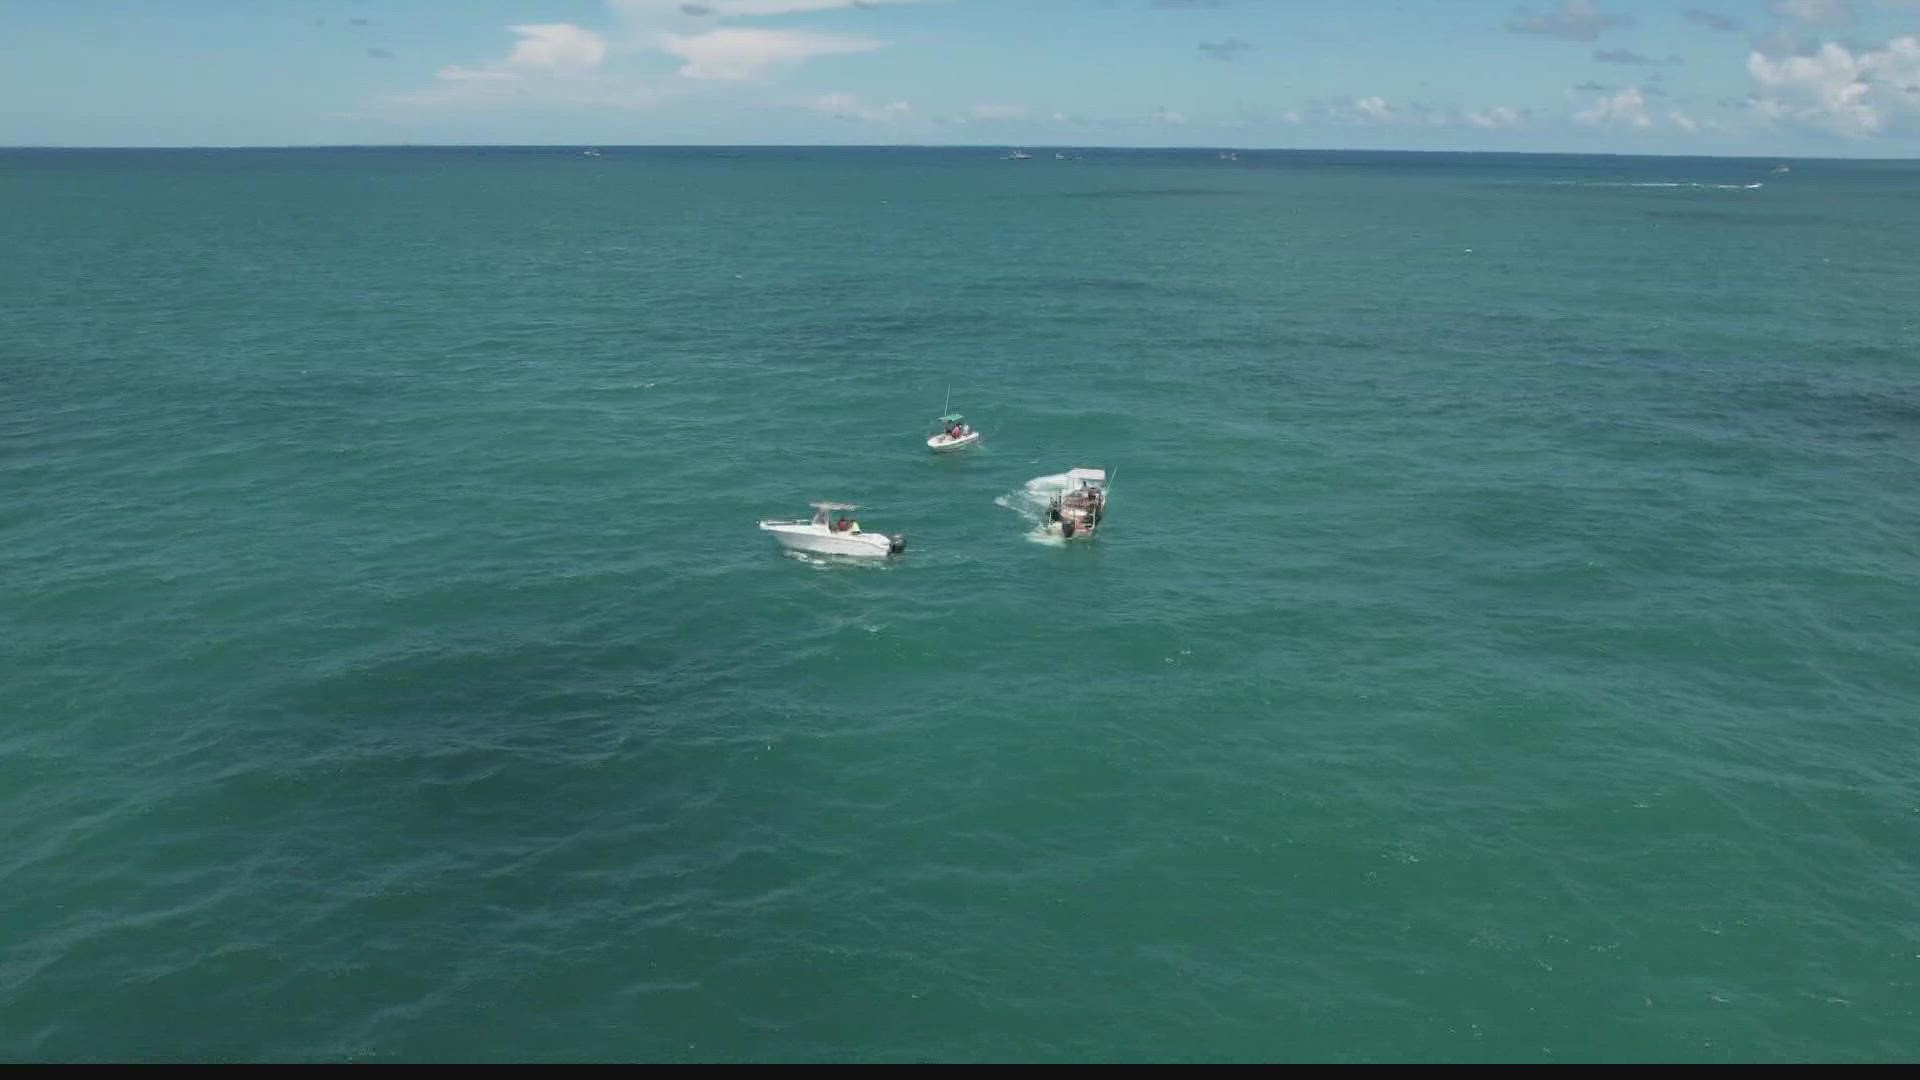 A small shrimp boat completely sinks and is later recovered off the coast of Vilano Beach